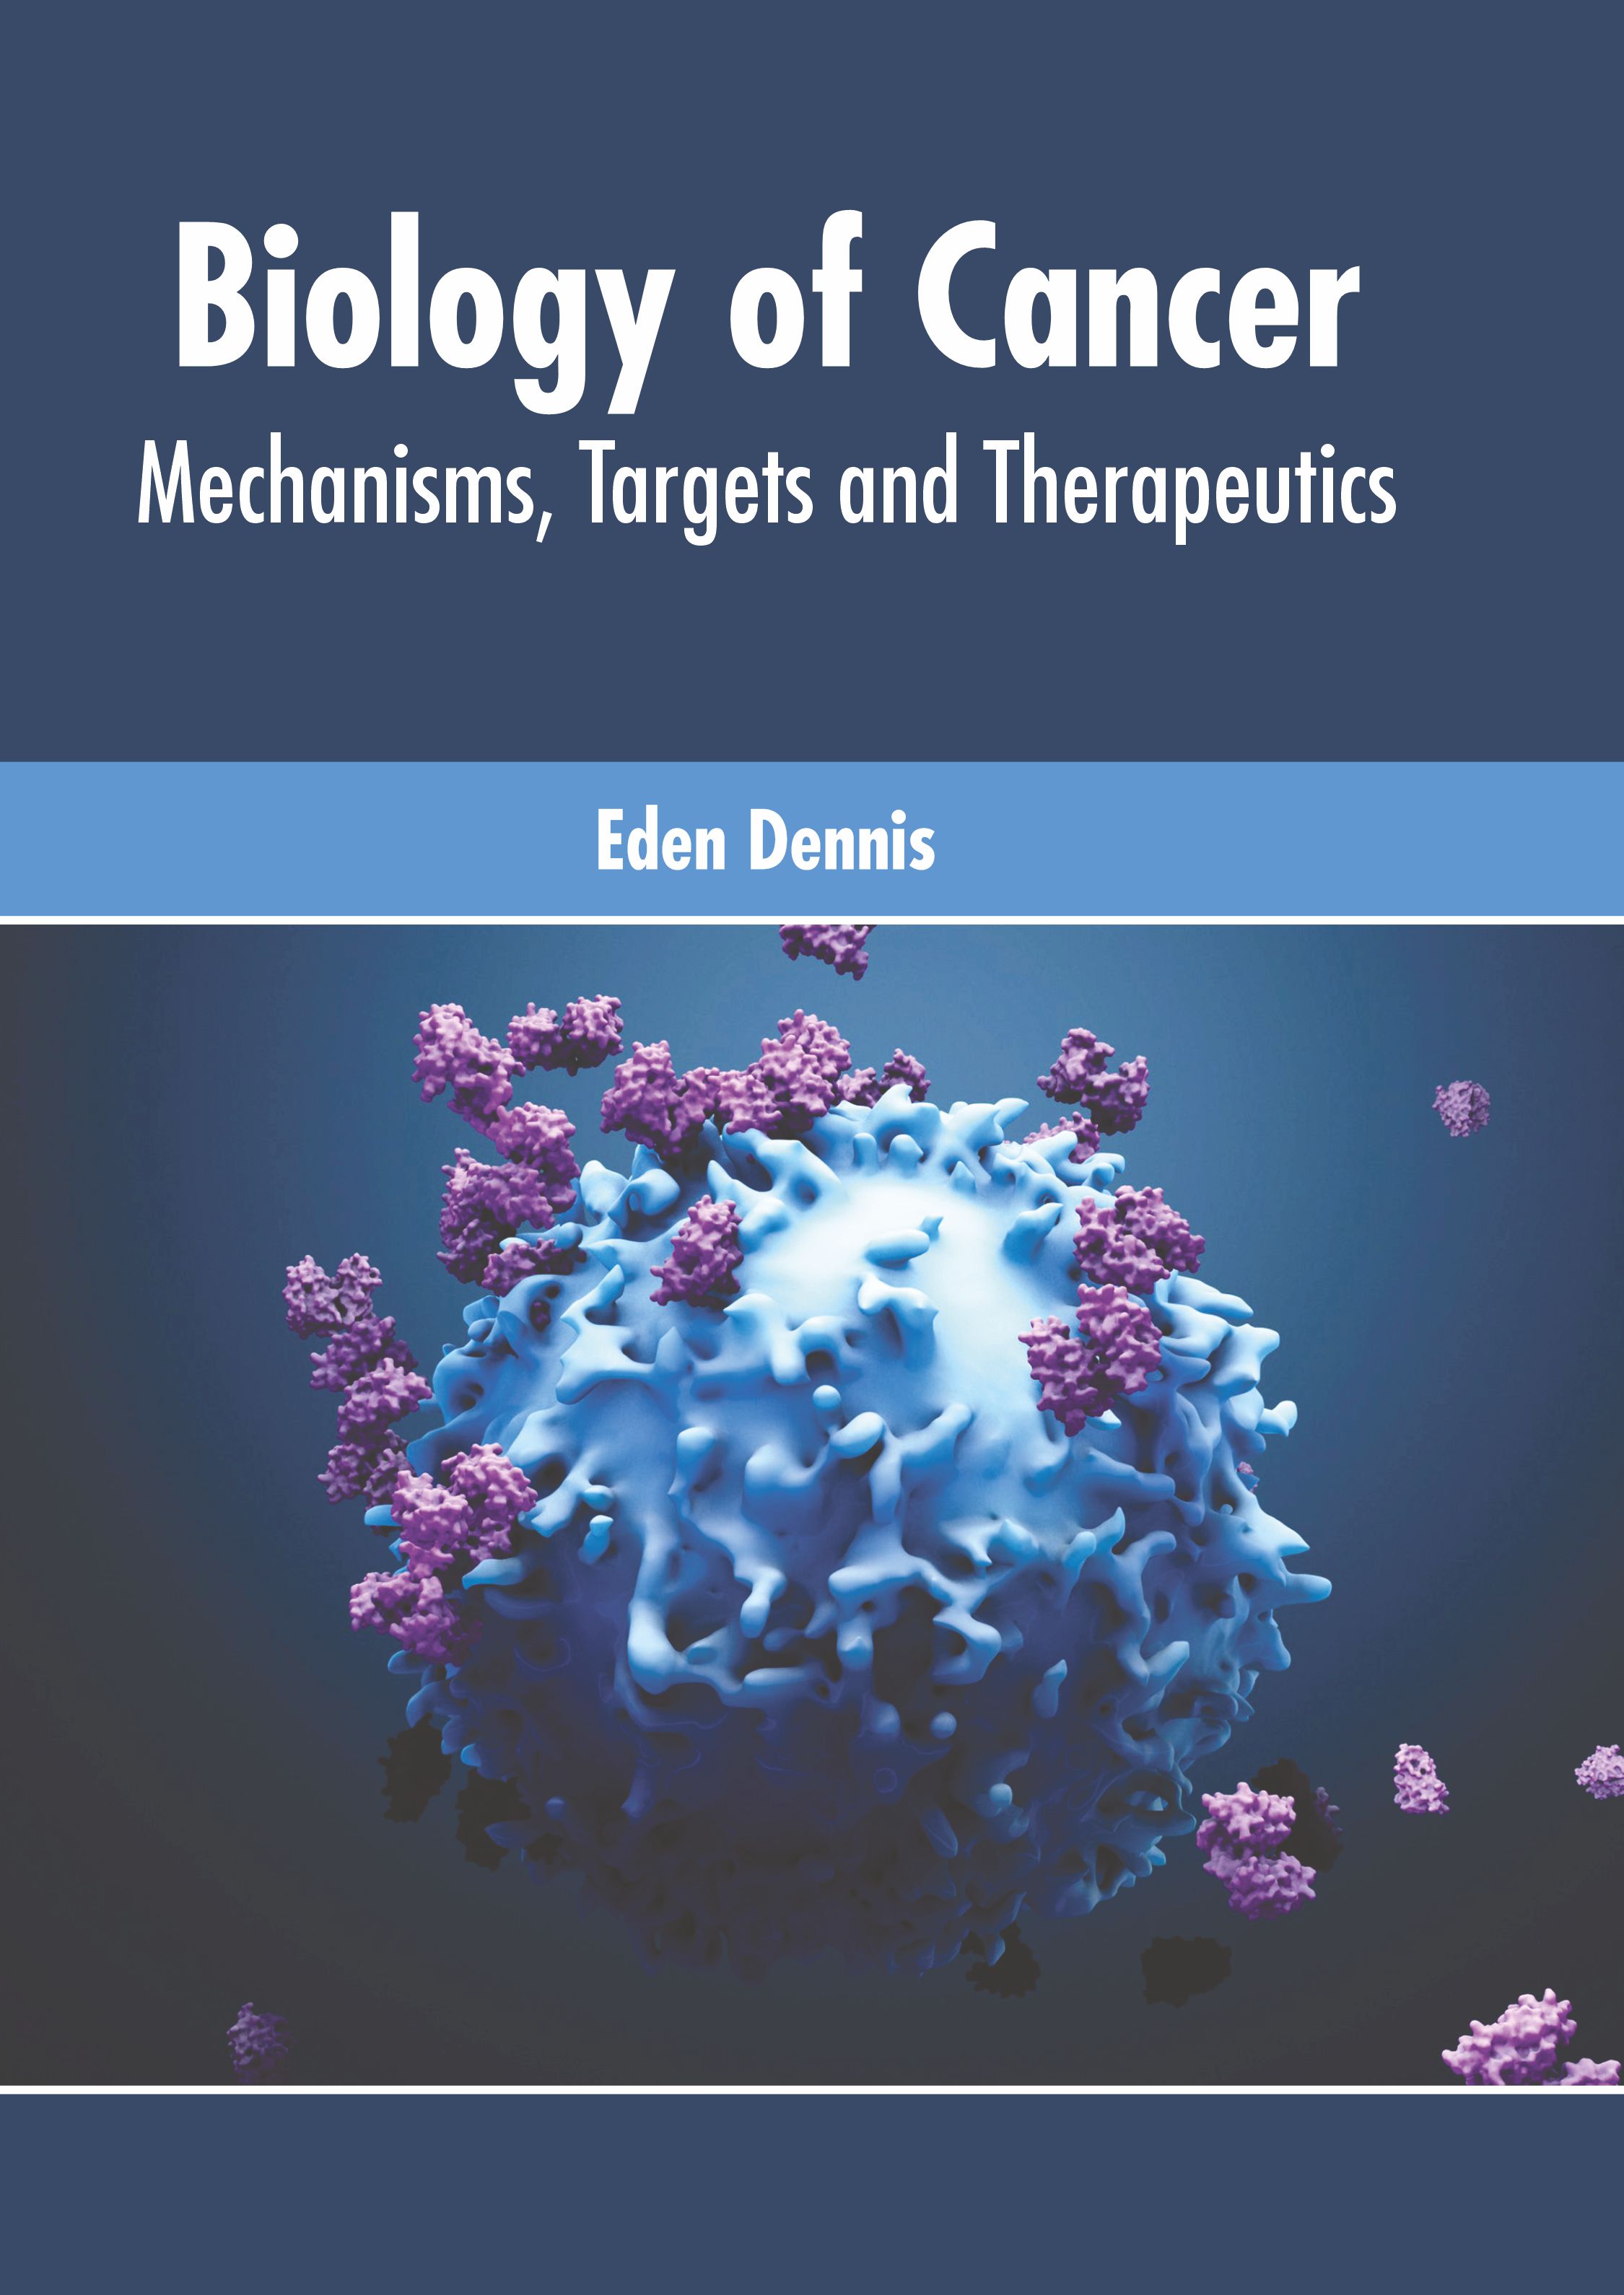 BIOLOGY OF CANCER: MECHANISMS, TARGETS AND THERAPEUTICS